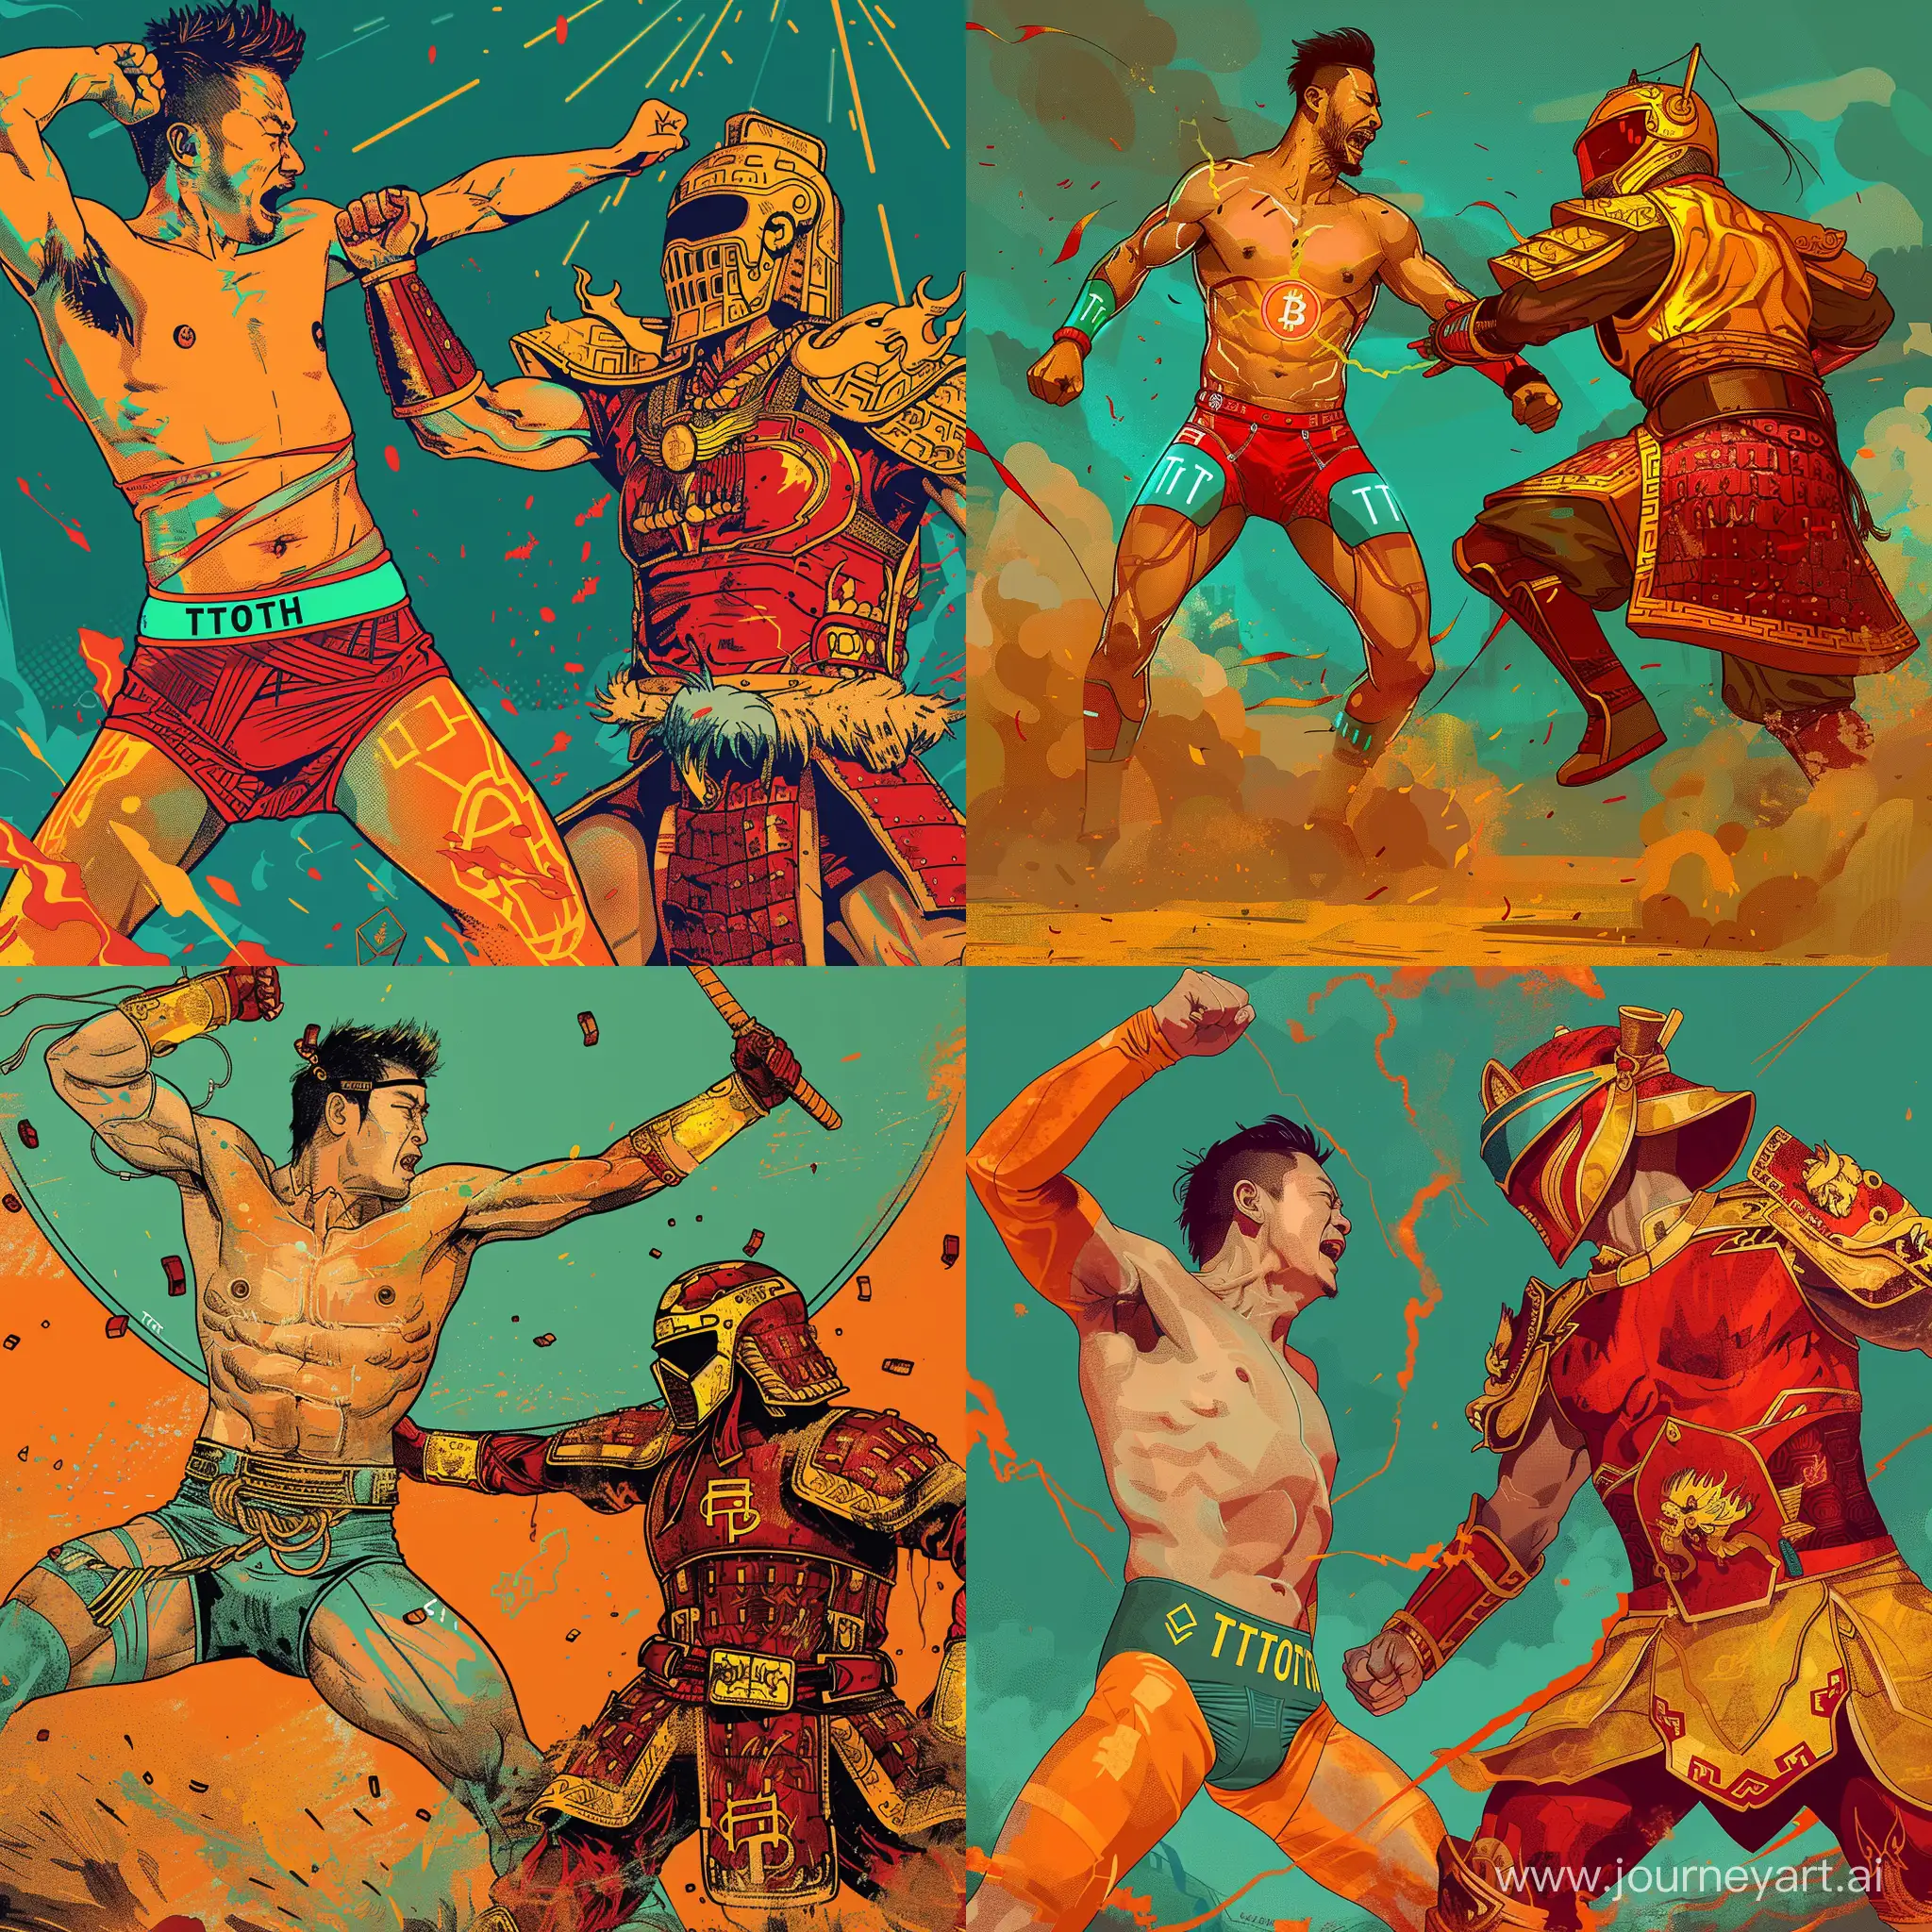 Art. Colour: deep orange and teal. Justin Sun in Tron crypto underwear defeated in battle by stoic Chinese warrior in red and yellow armour and visor helmet.